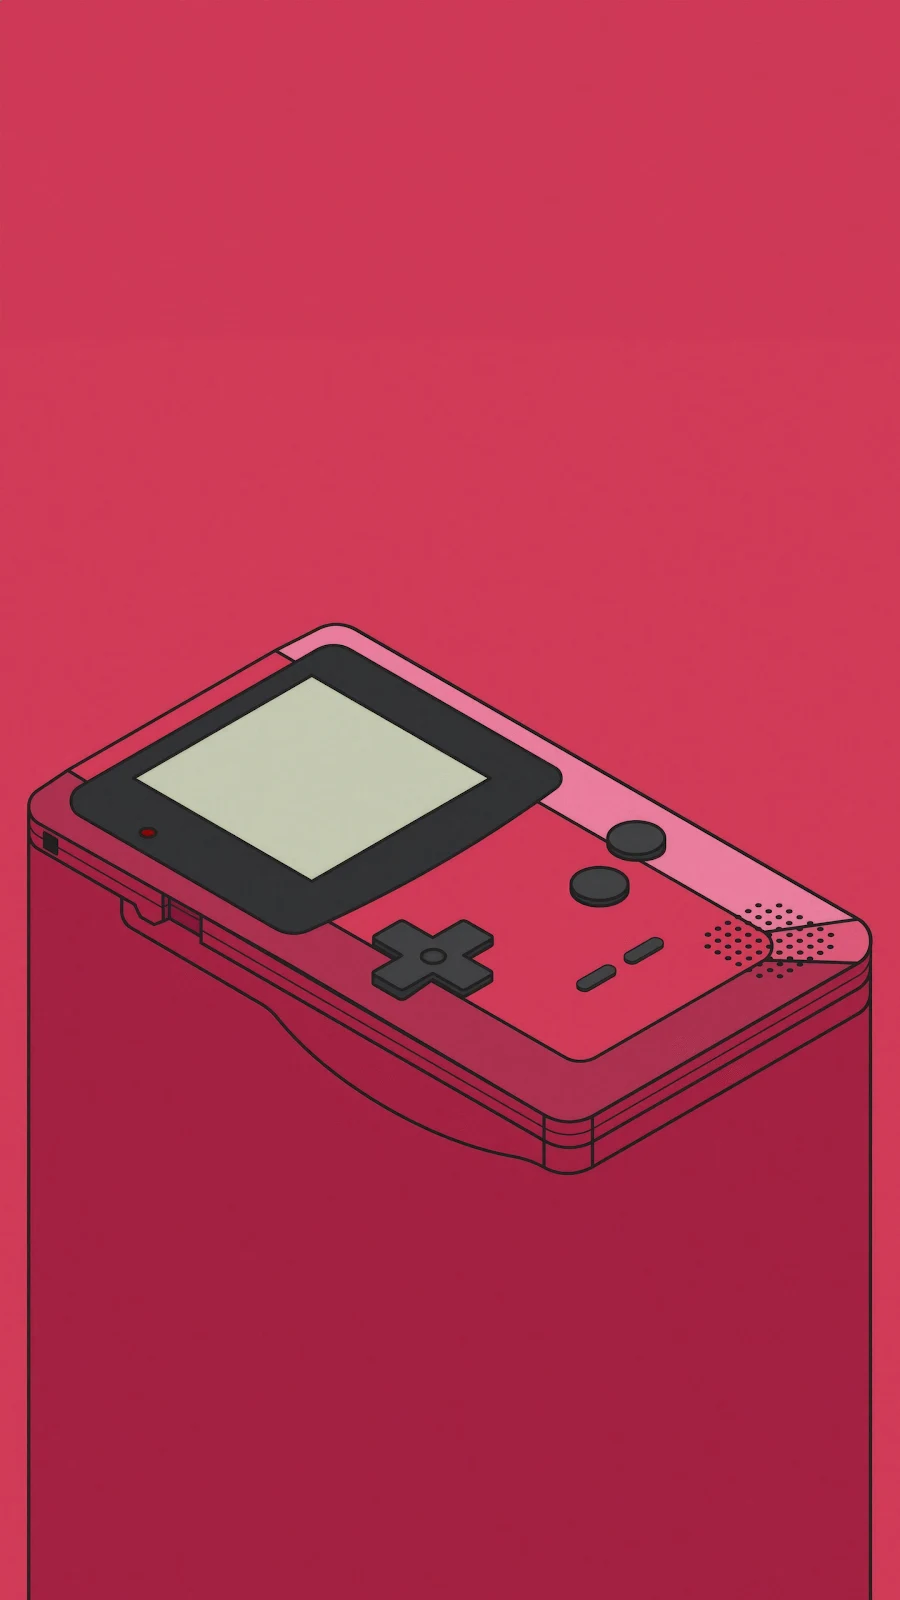 A Cool Gameboy Console Minimal Red 4K  iPhone Wallpaper for Free Download in High Quality [2160x3840]